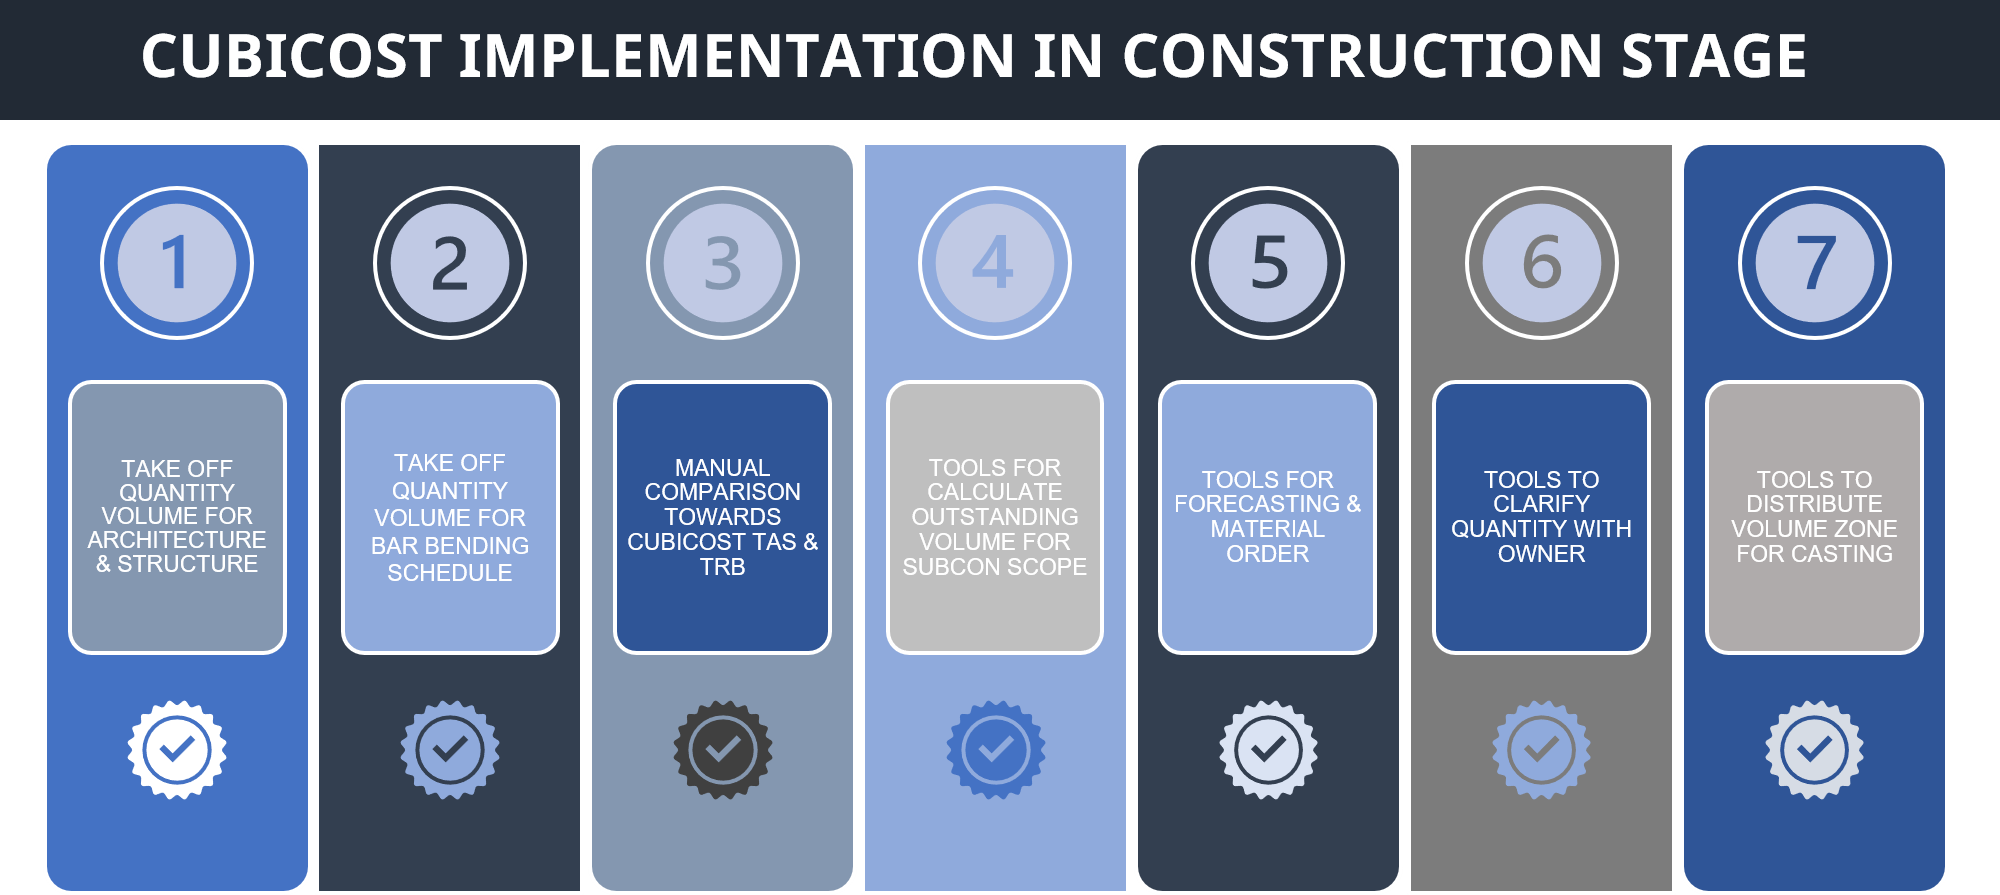 Implementation in Construction Stage